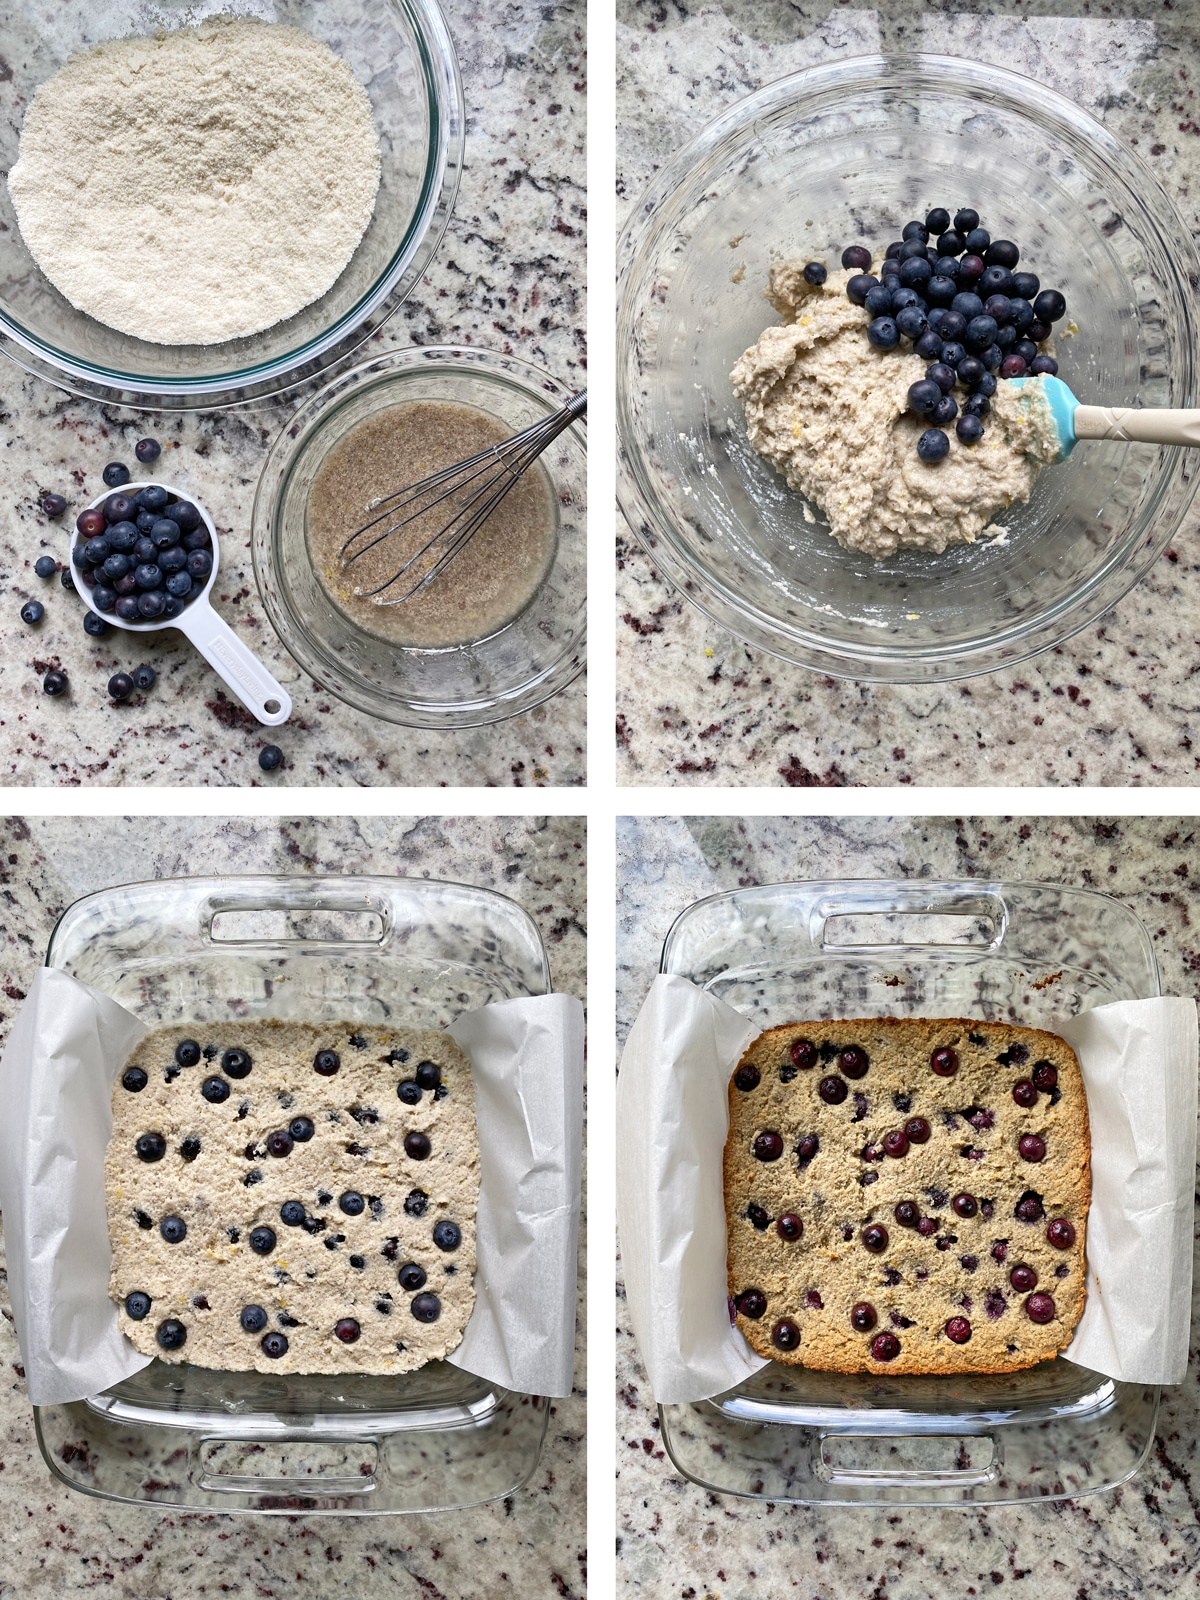 how to make the blueberry cake